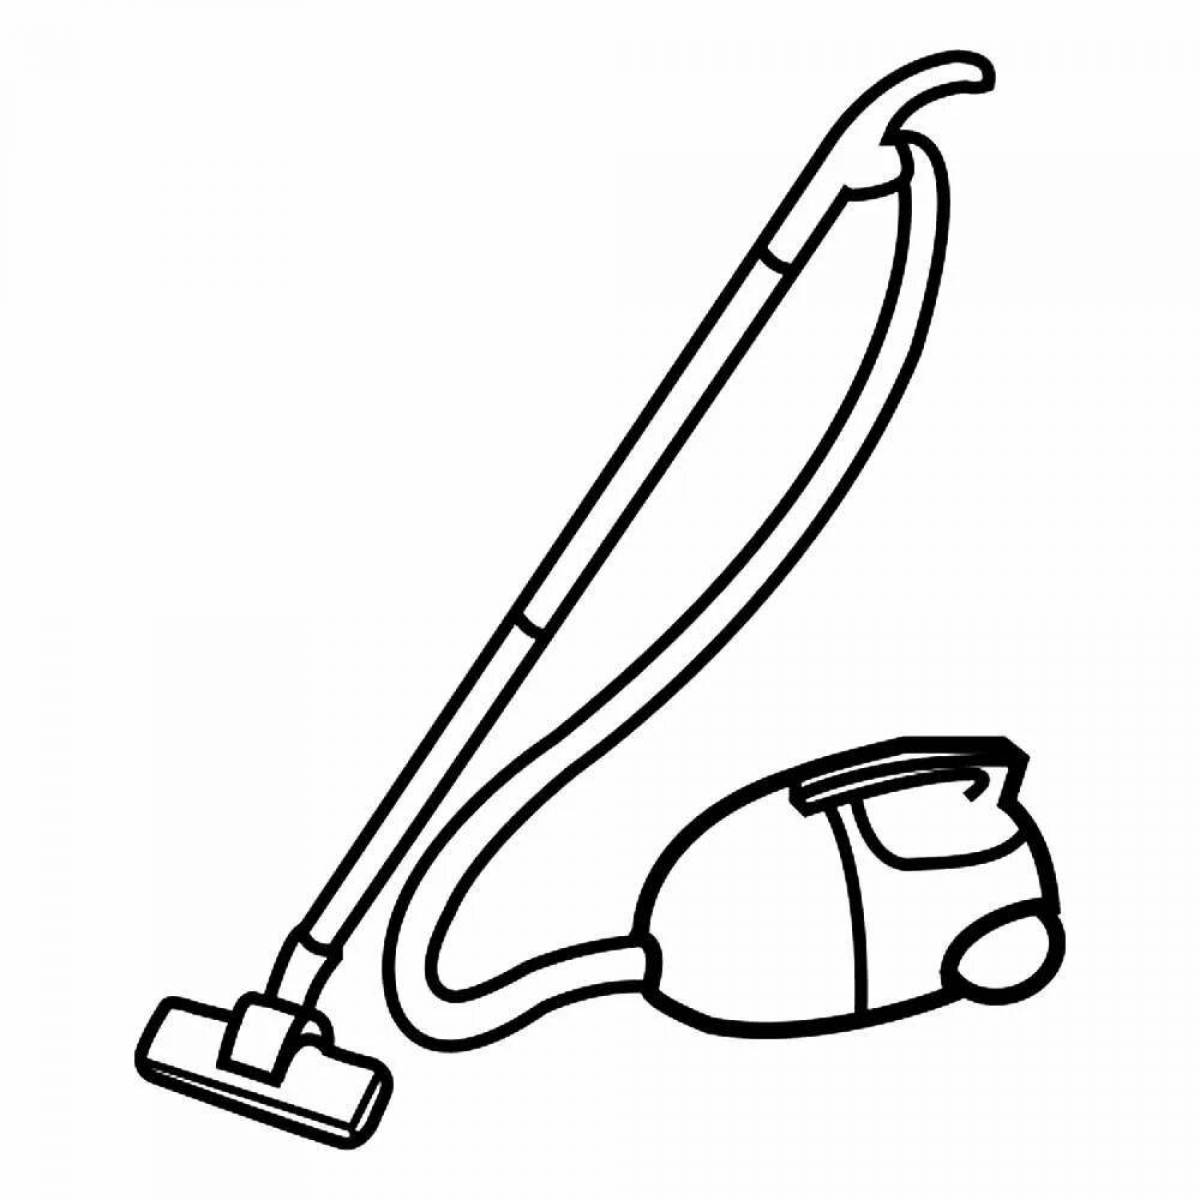 Joyful vacuum cleaner coloring page for kids